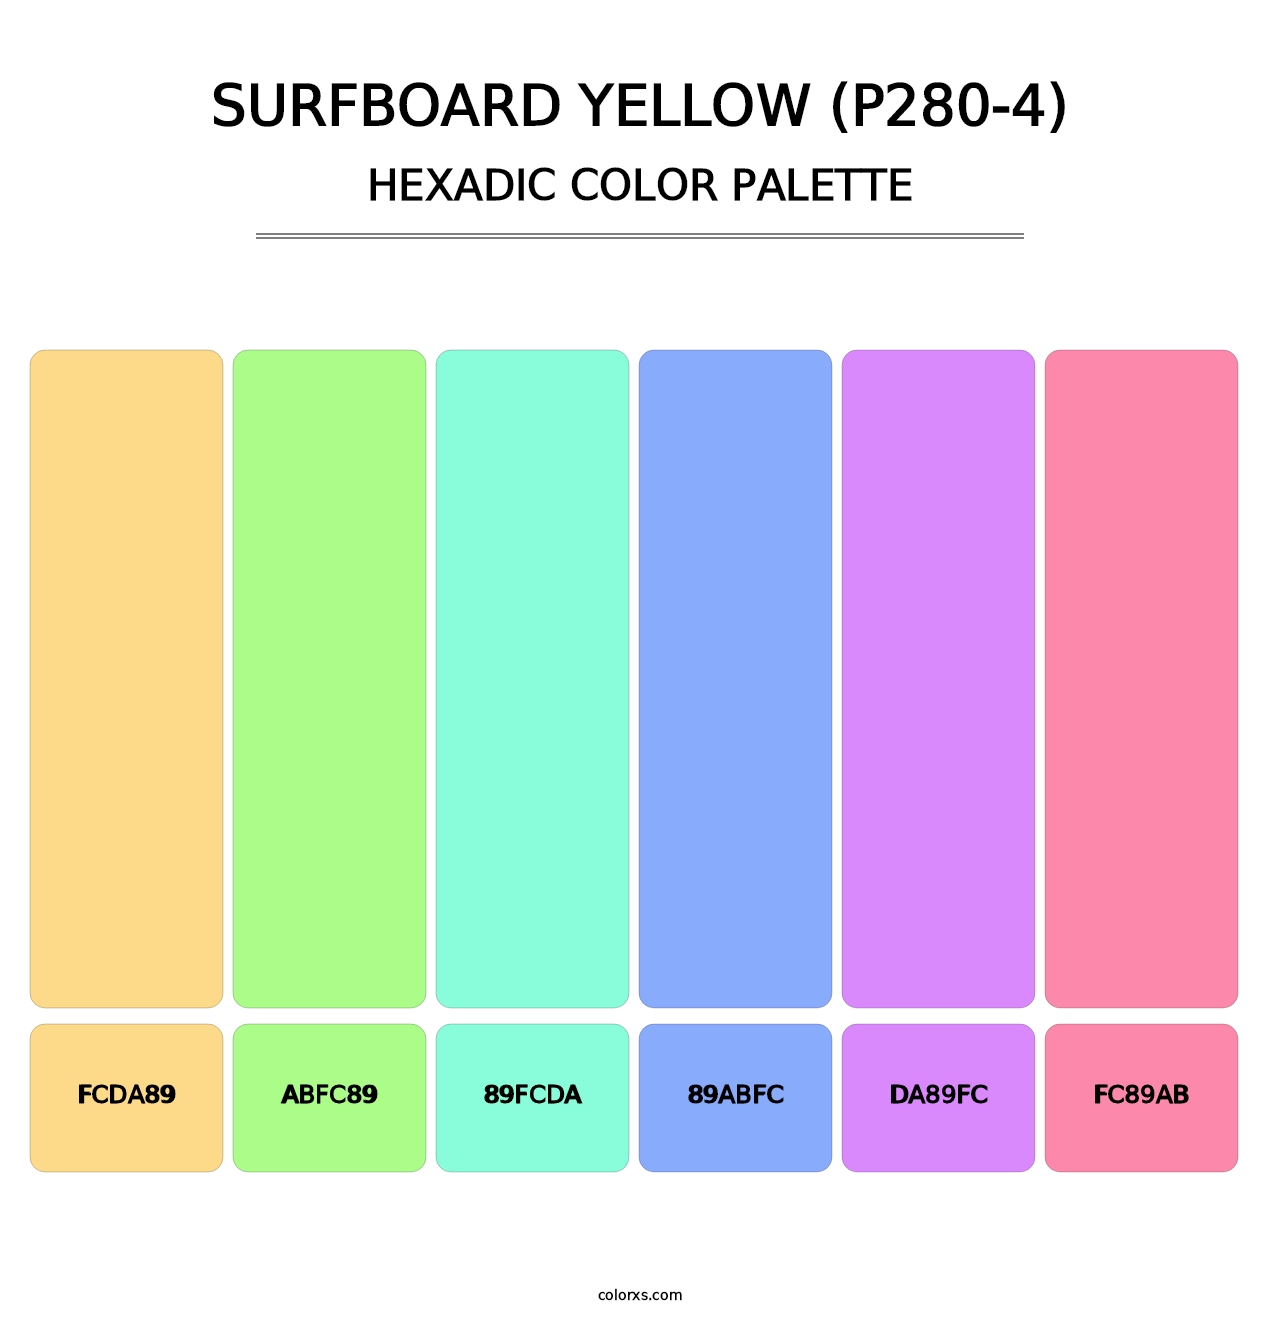 Surfboard Yellow (P280-4) - Hexadic Color Palette